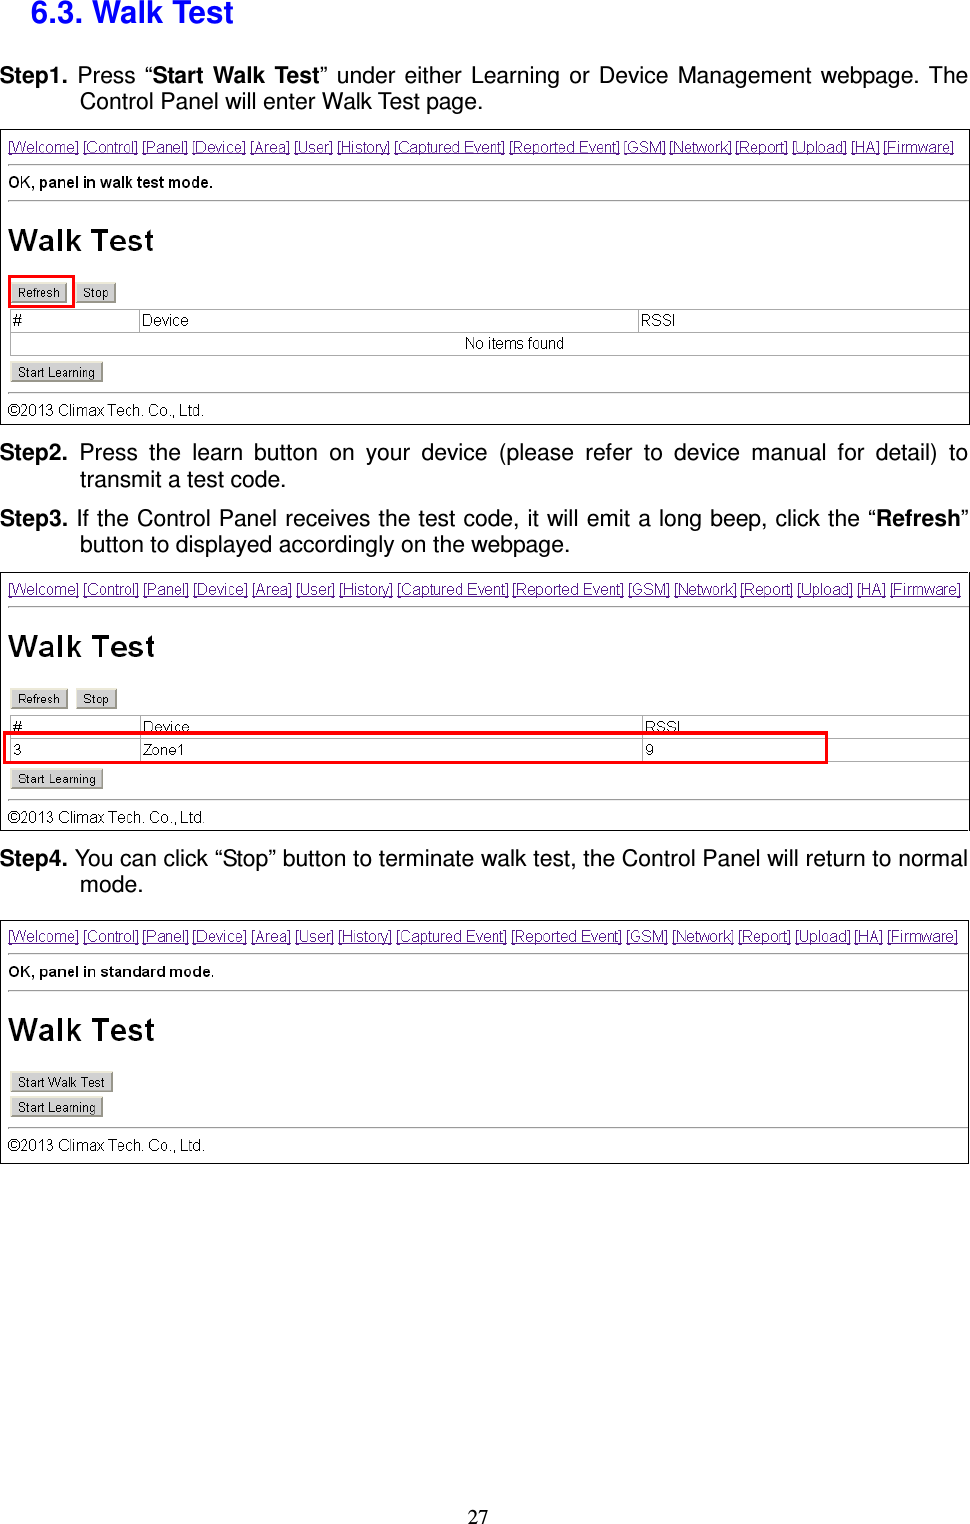  27 6.3. Walk Test   Step1.  Press “Start  Walk  Test”  under either  Learning  or  Device  Management webpage. The Control Panel will enter Walk Test page.  Step2.  Press  the  learn  button  on  your  device  (please  refer  to  device  manual  for  detail)  to transmit a test code. Step3. If the Control Panel receives the test code, it will emit a long beep, click the “Refresh” button to displayed accordingly on the webpage.  Step4. You can click “Stop” button to terminate walk test, the Control Panel will return to normal mode.          